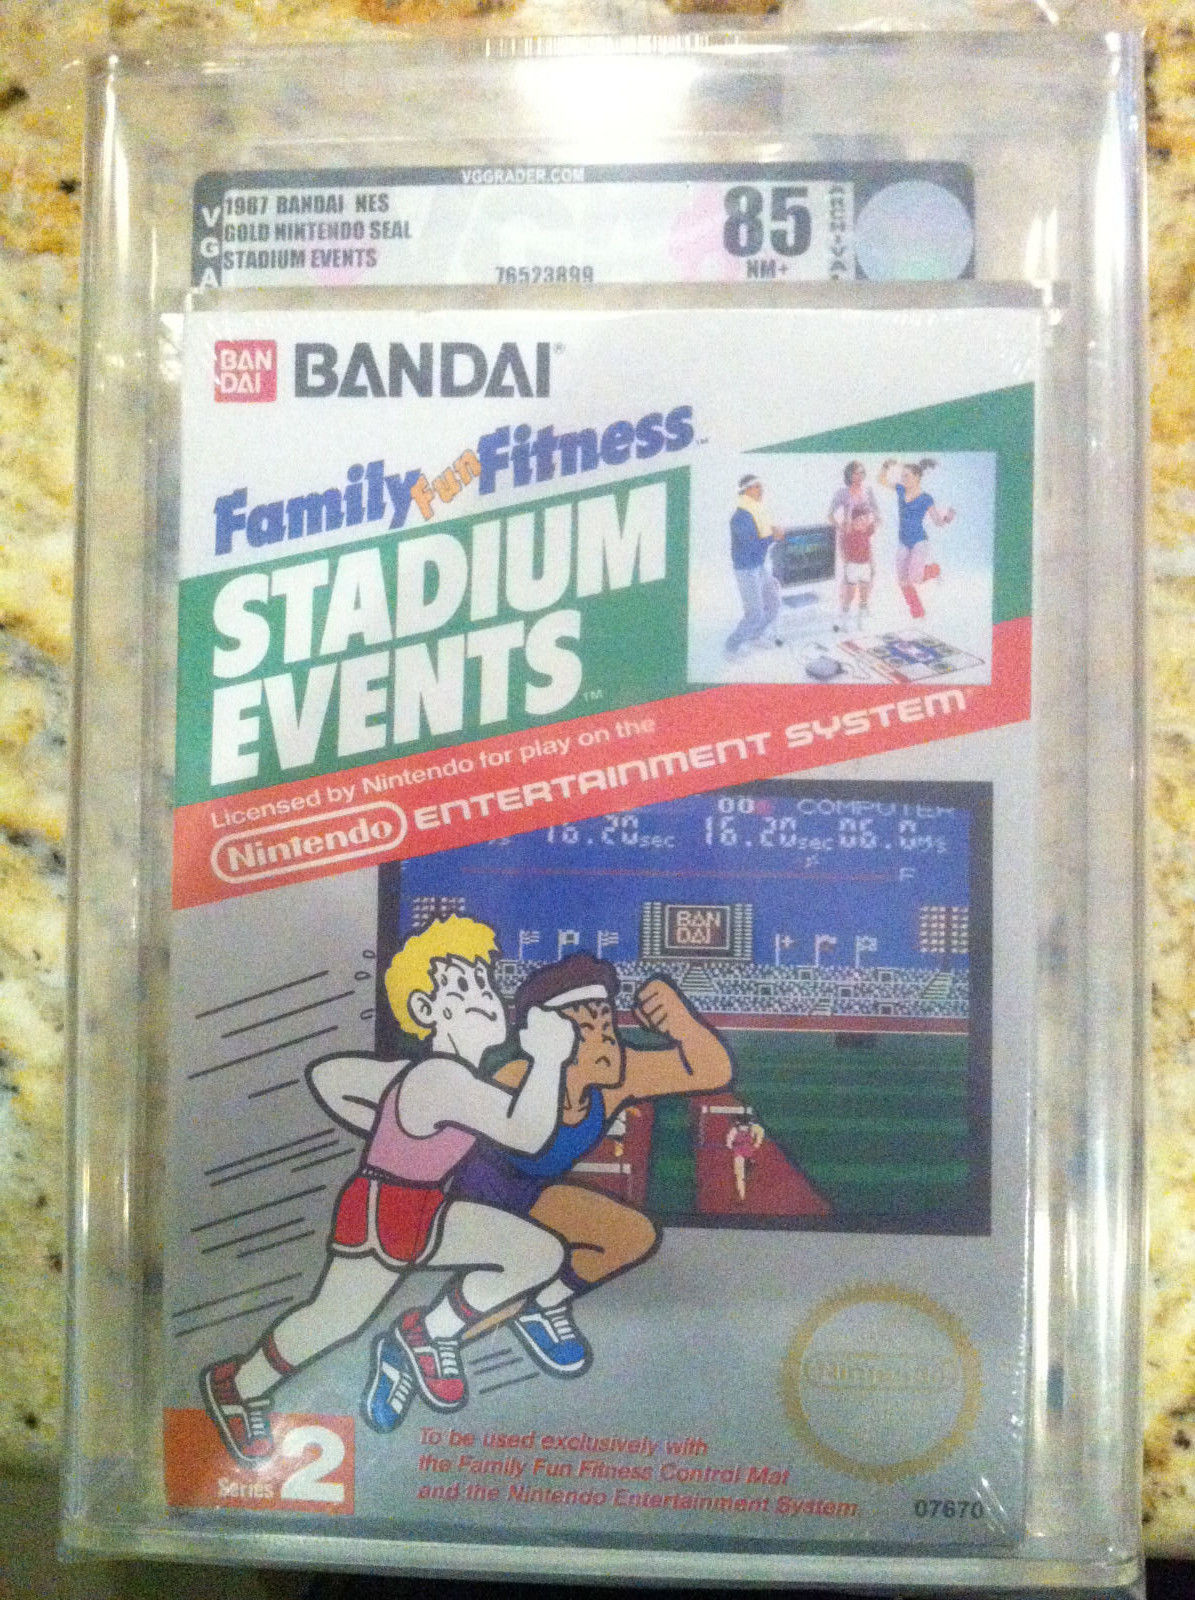 Rare Copy Of “Stadium Events” Video Game For Nintendo Can Be Yours For Only $100K Or So